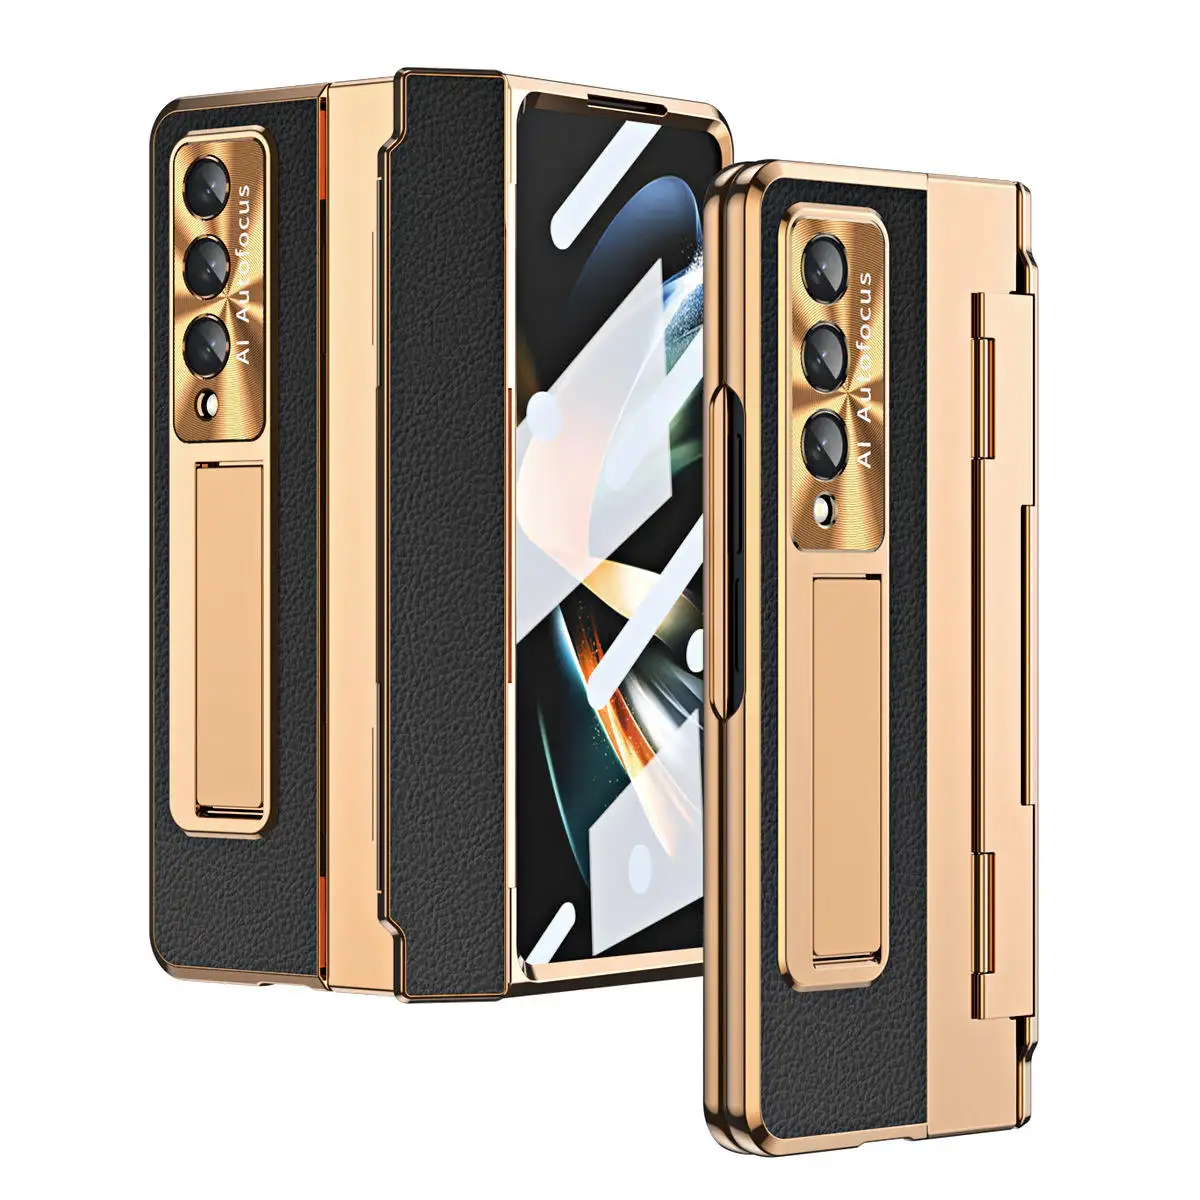 Case And Membrane Integration Phone Case For Samsung for Galaxy Z Fold 4 Case With Hinge Mobile Phone Cover For Fold 3